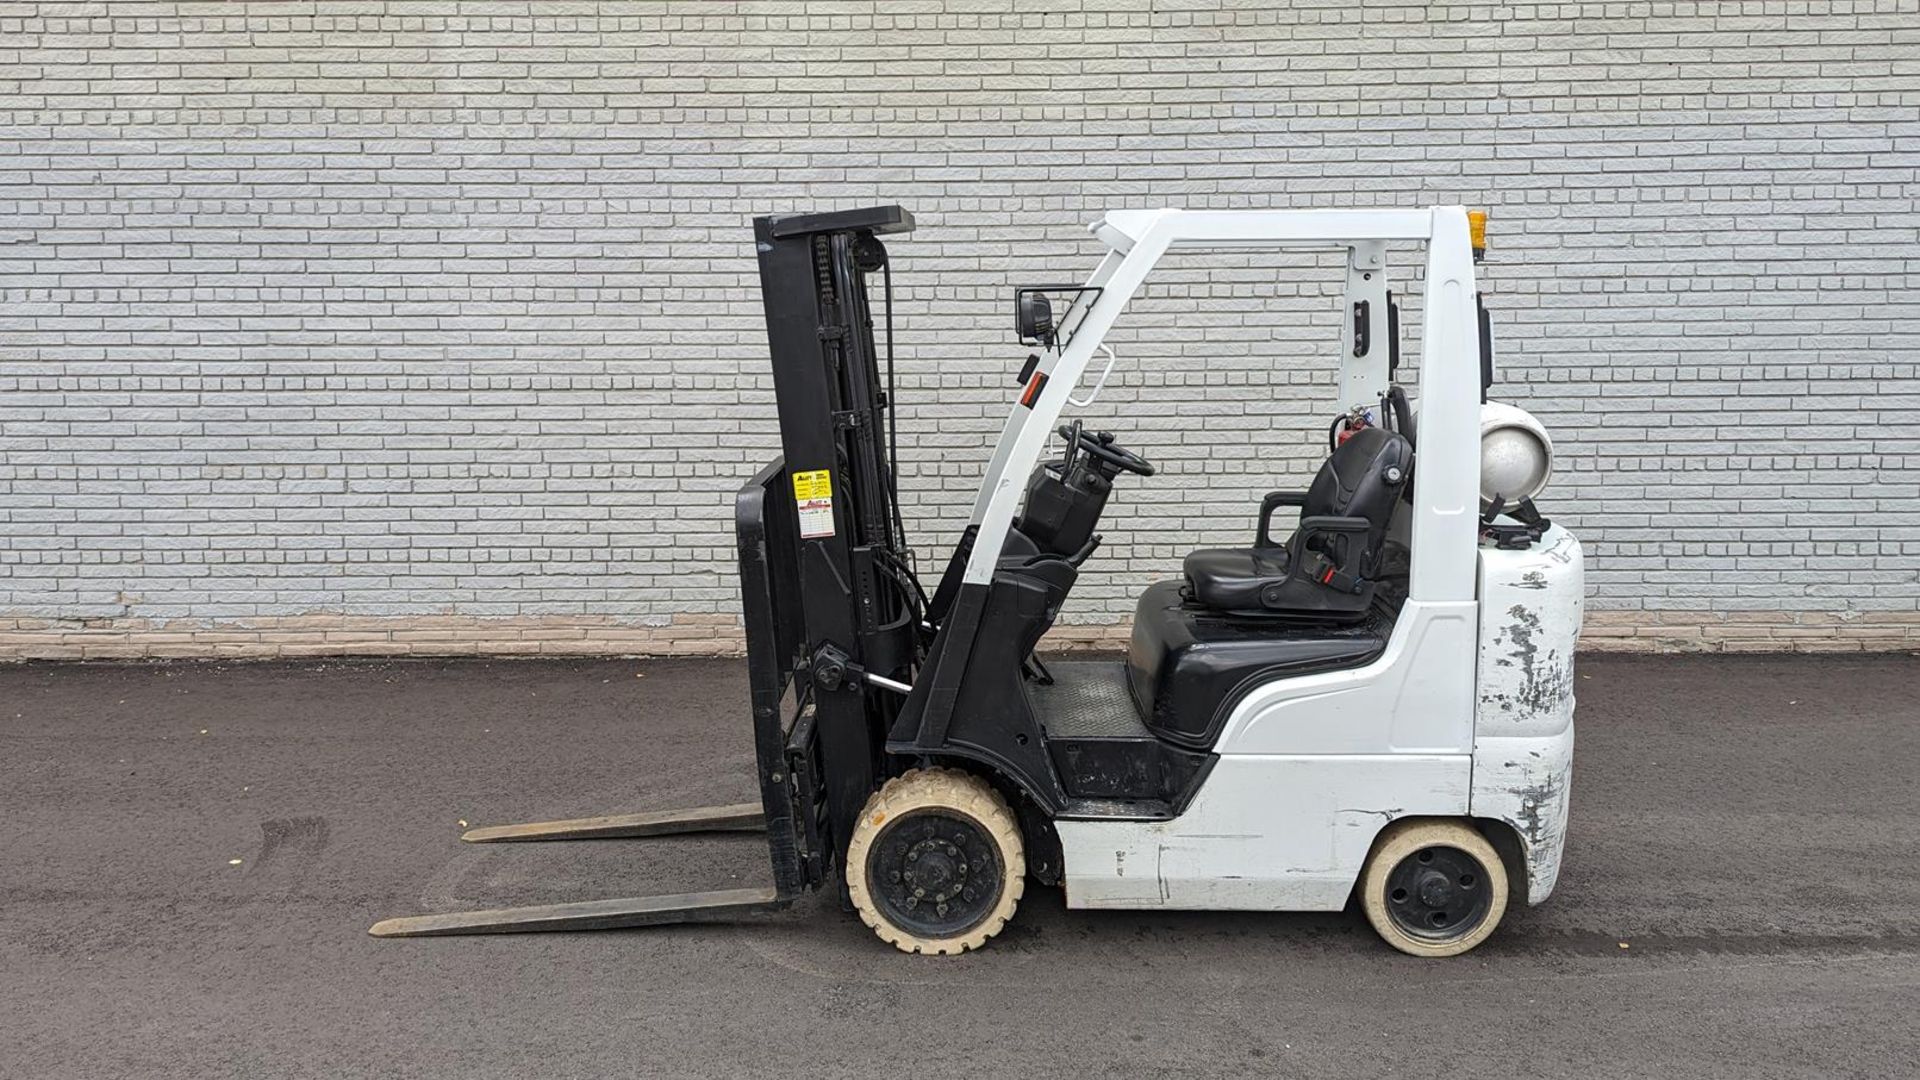 2018, UNICARRIERS, MCP1F2A25LV, 4,400 LBS., 3 STAGE, LPG FORKLIFT, SIDESHIFT - Image 3 of 17